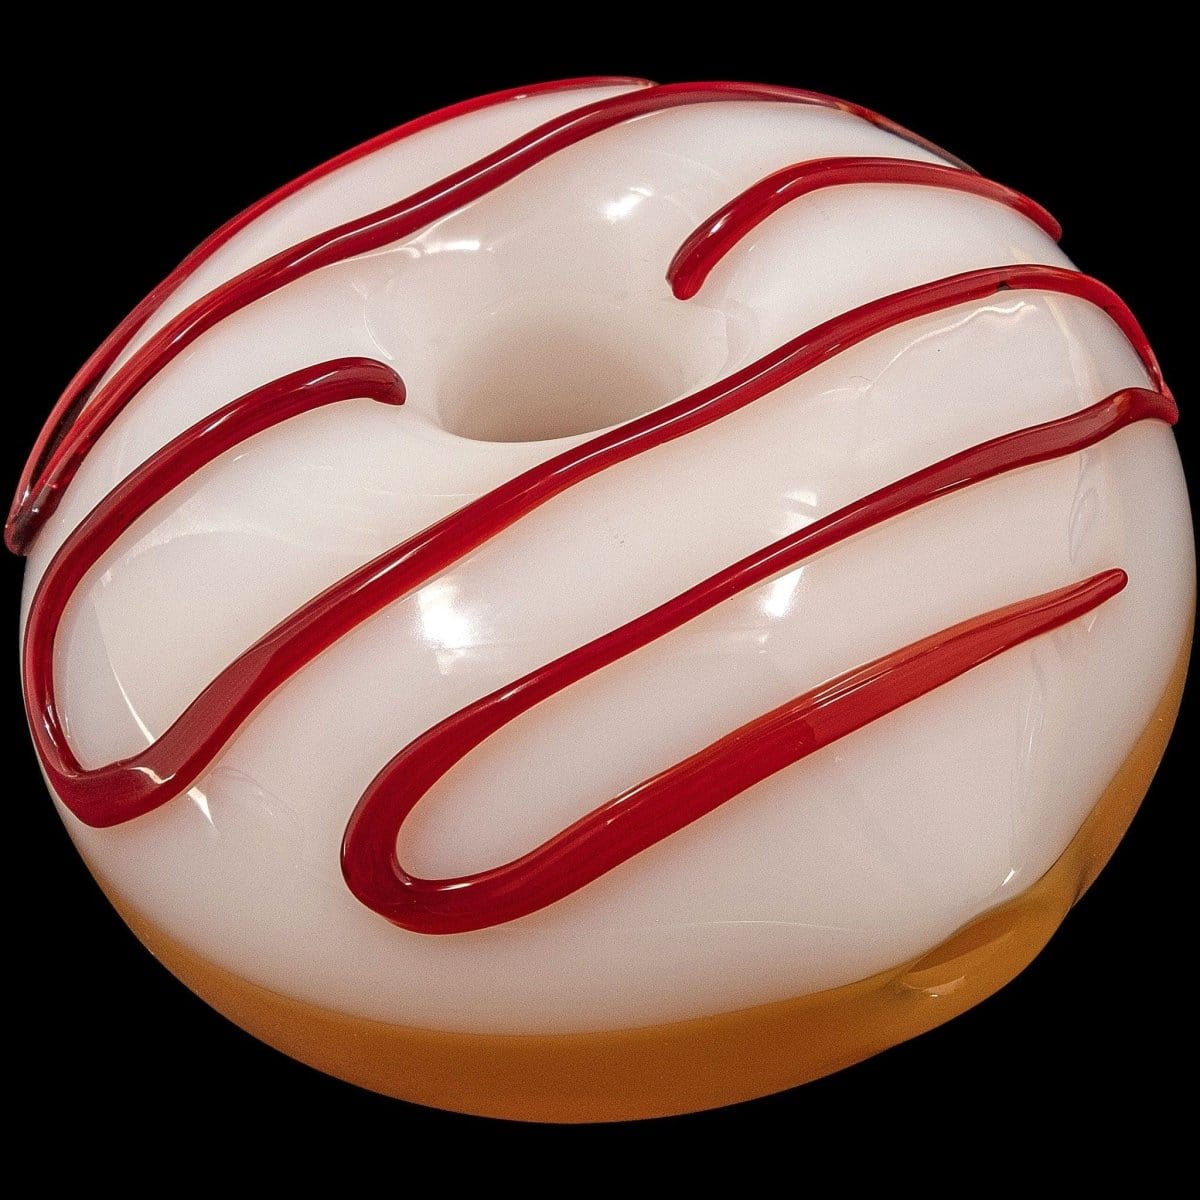 LA Pipes Hand Pipe Cherry Frosting "Frosted Donut" Glass Pipe